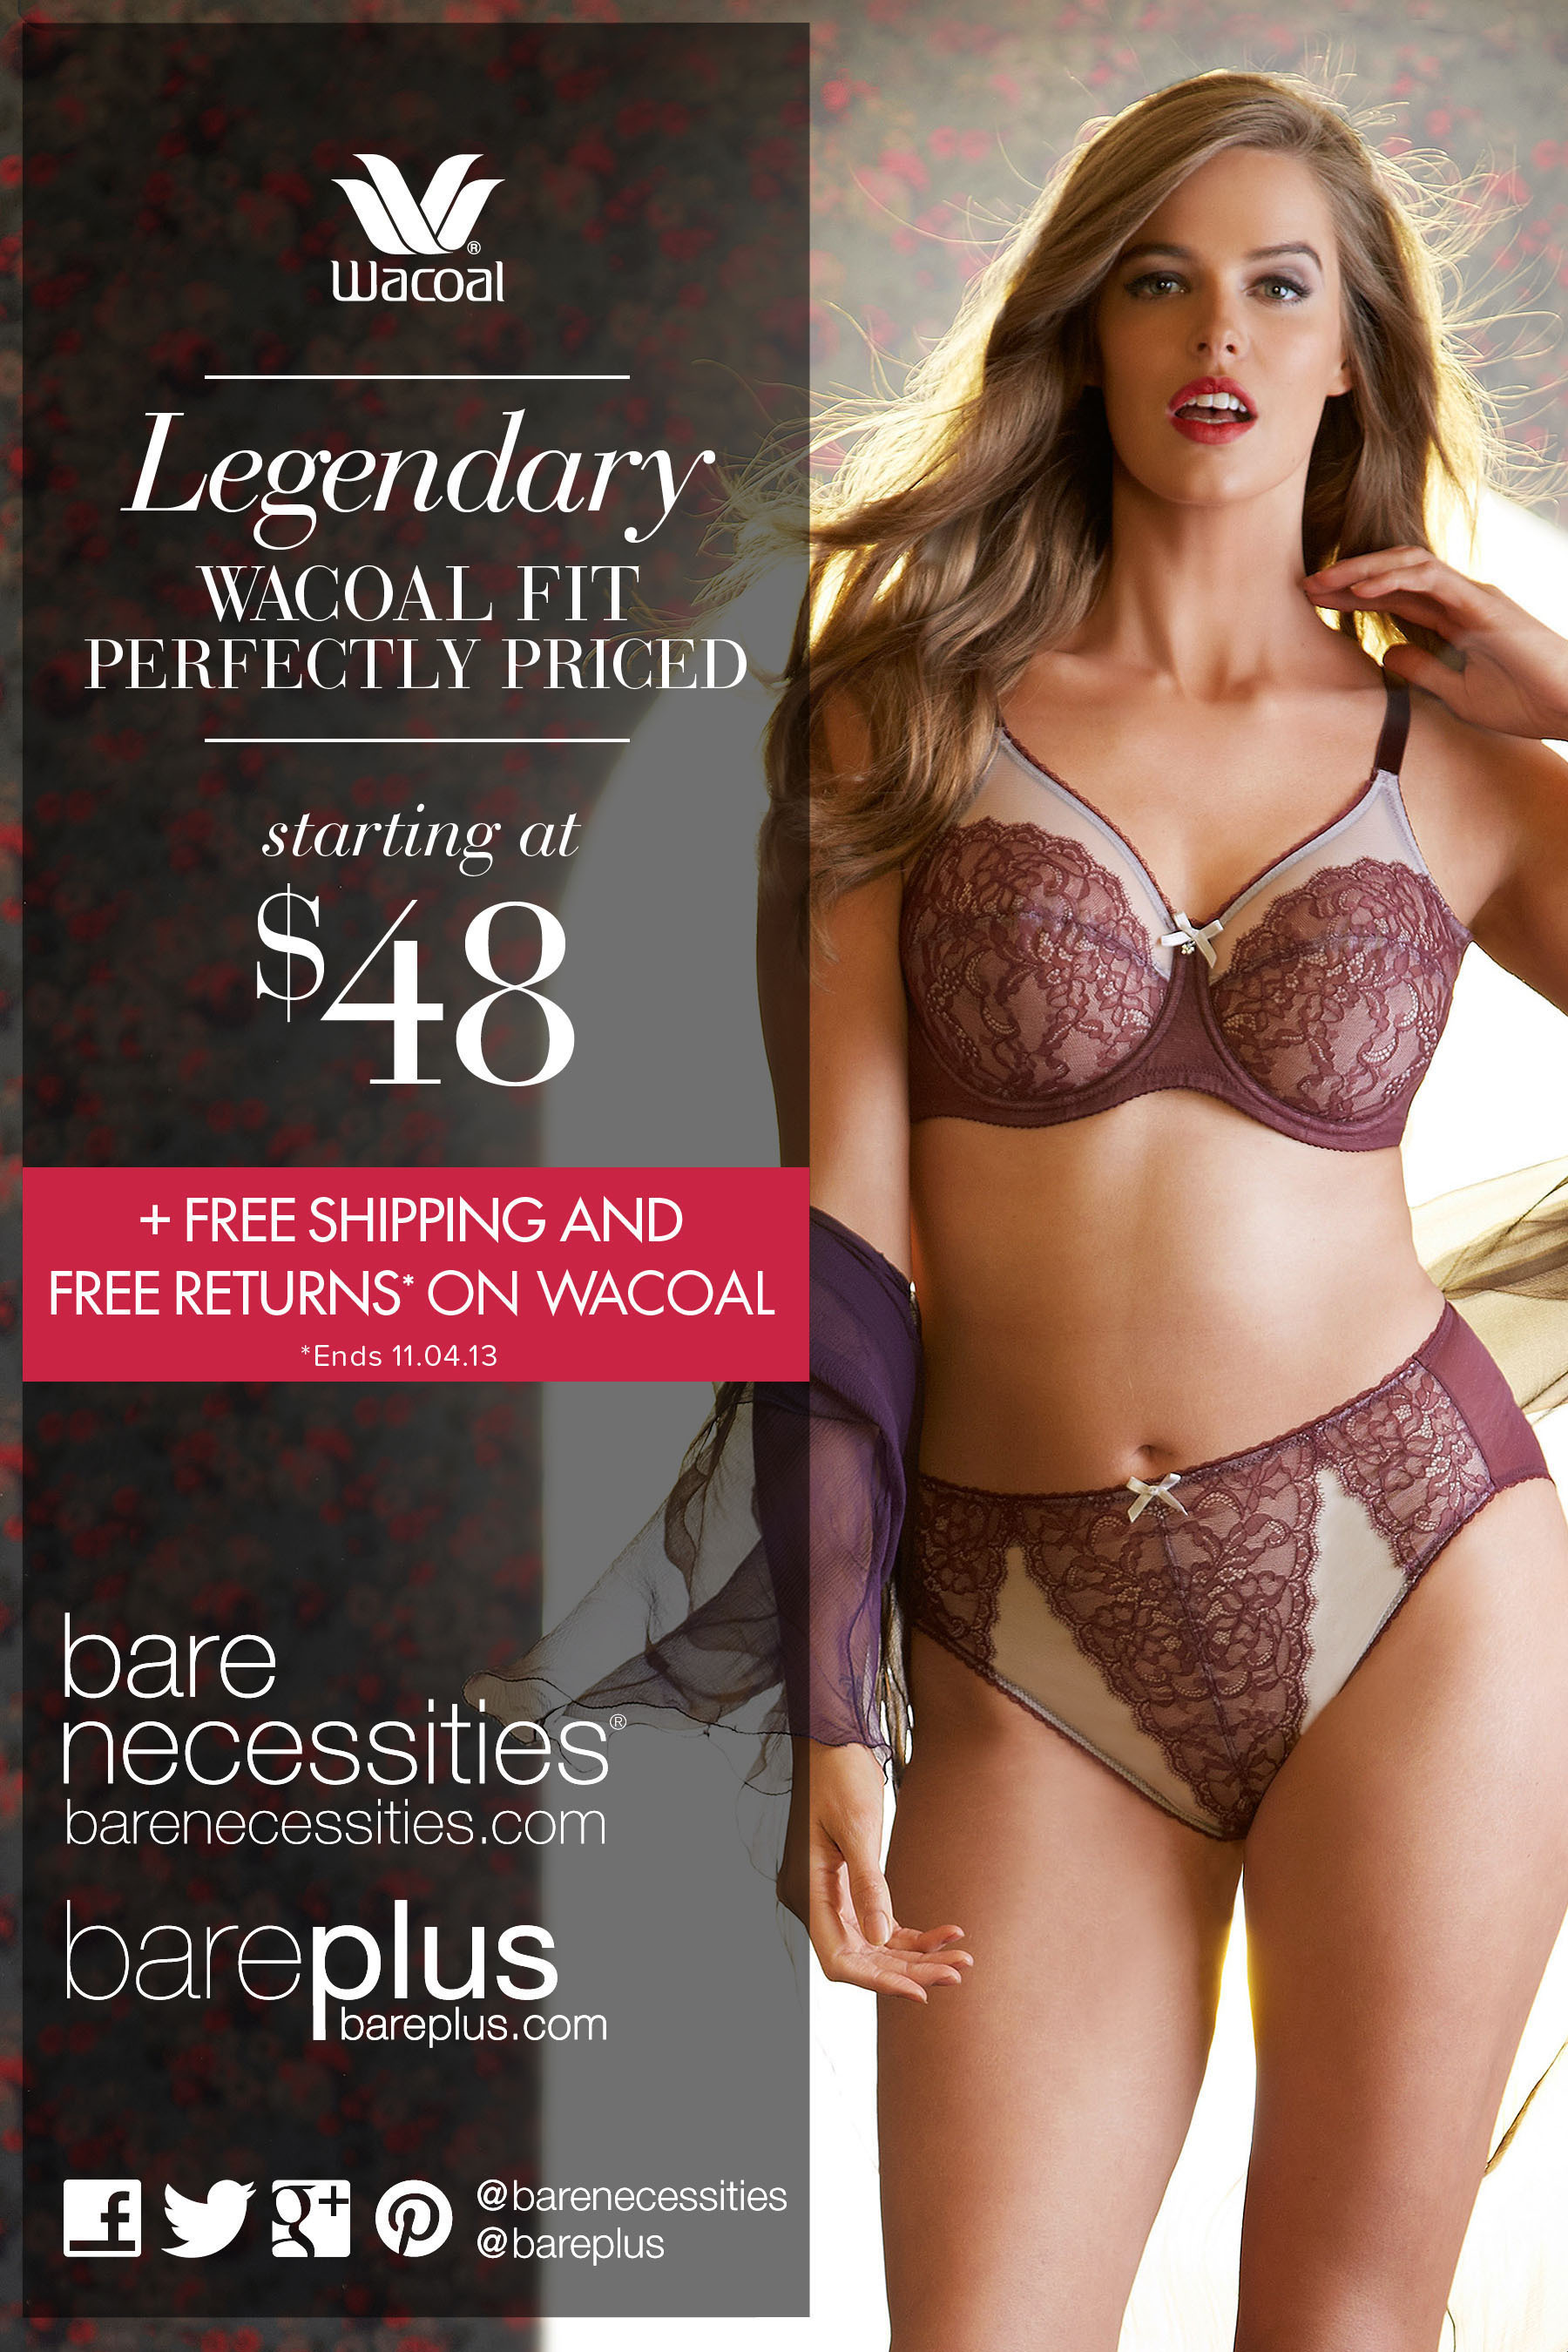 Bare Necessities Unleashes Wacoal: Legendary Fit, Perfectly Priced